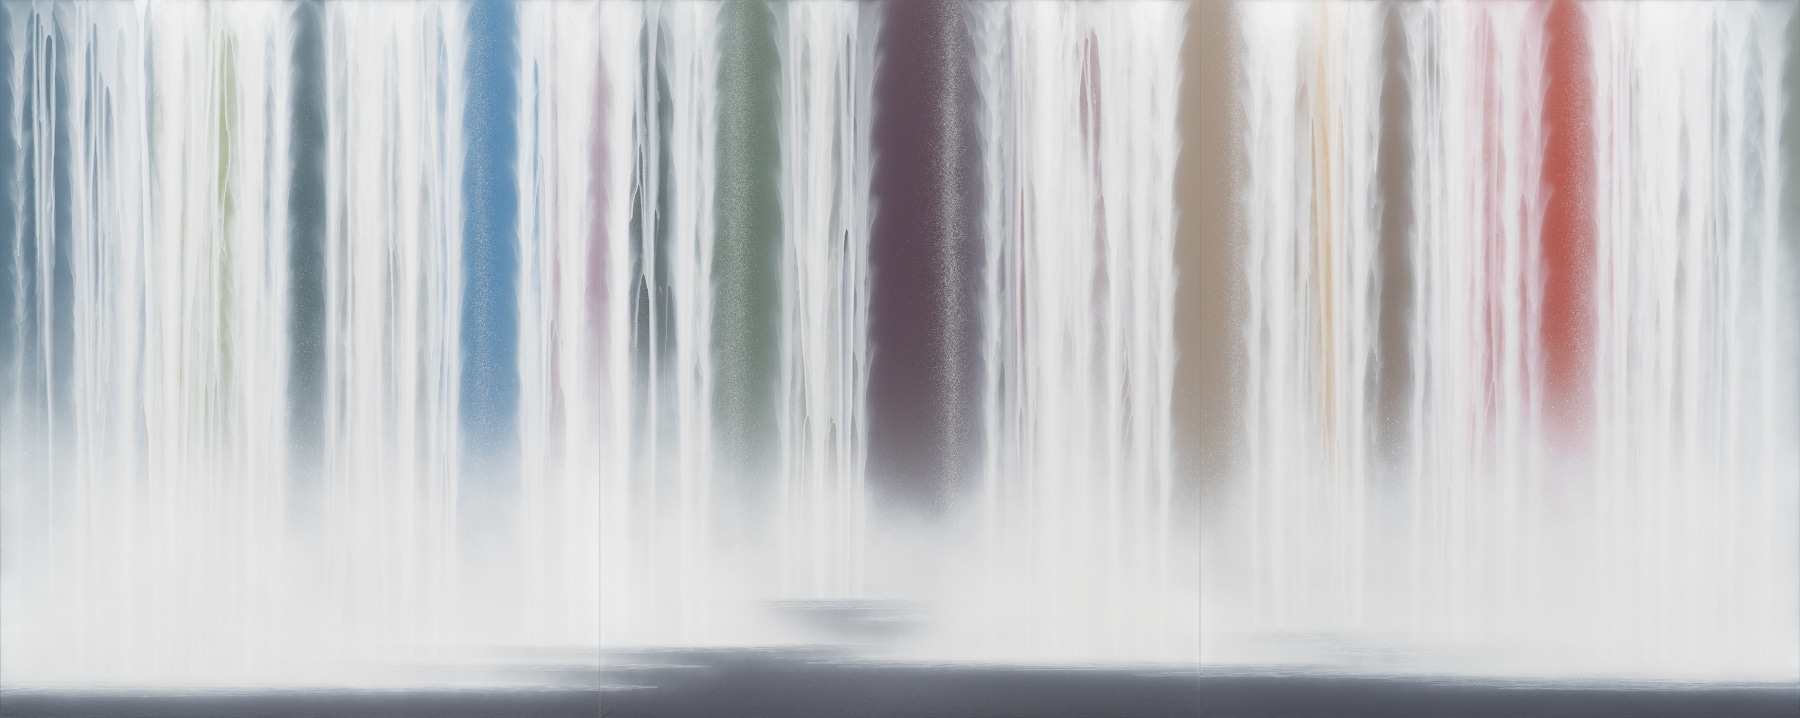 Waterfall on Colors
2022, 193.9 x 486.3 cm